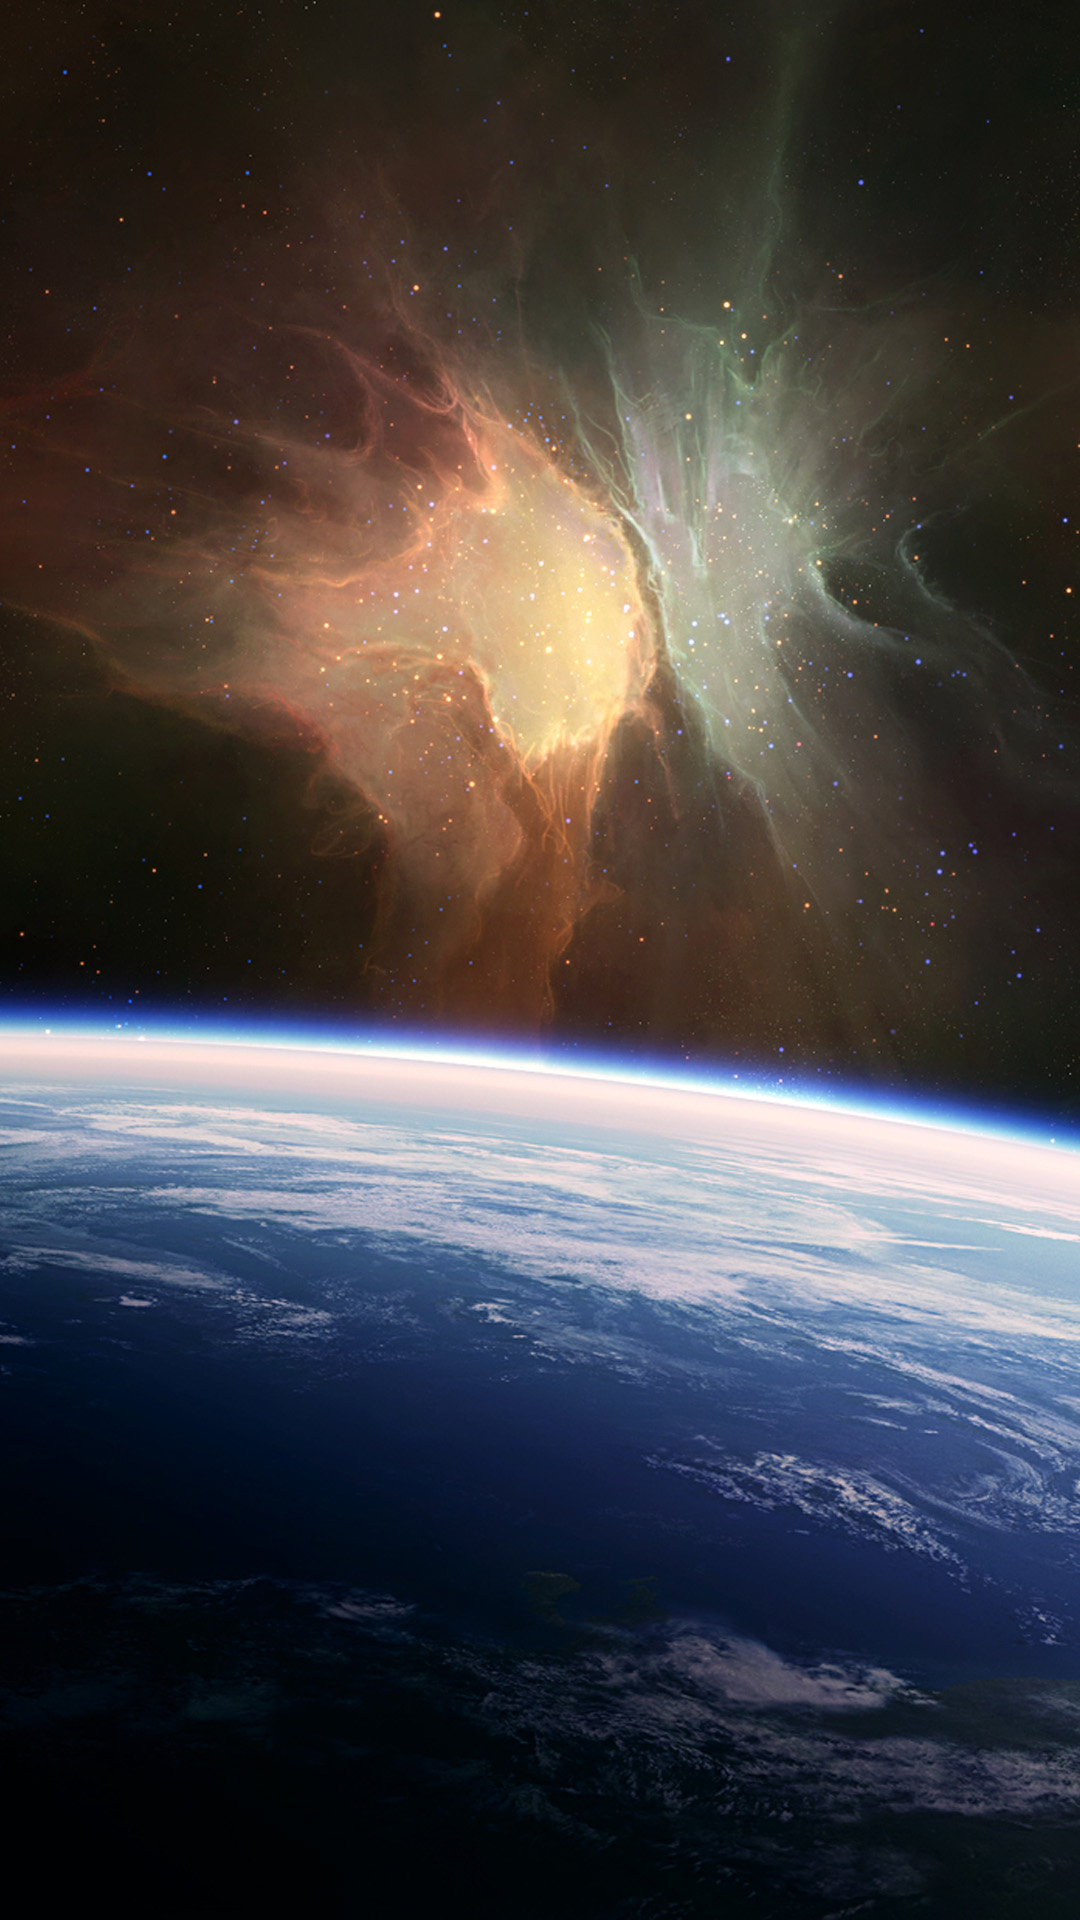 best phone wallpaper ever,atmosphere,outer space,sky,space,earth